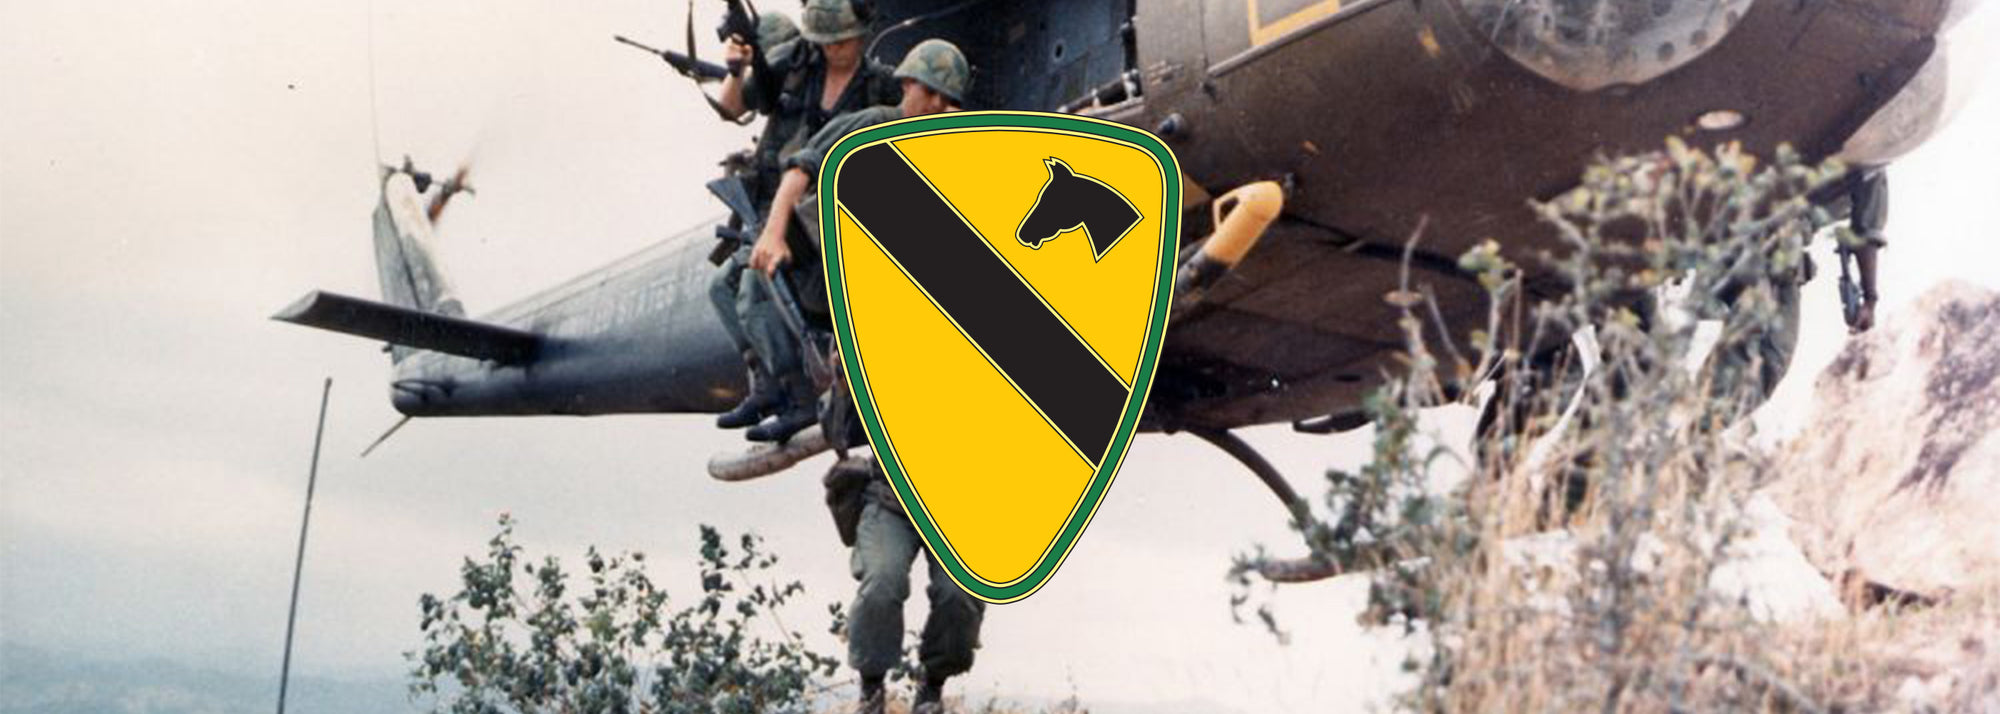 1st Cavalry Division Airmobile during the Vietnam War